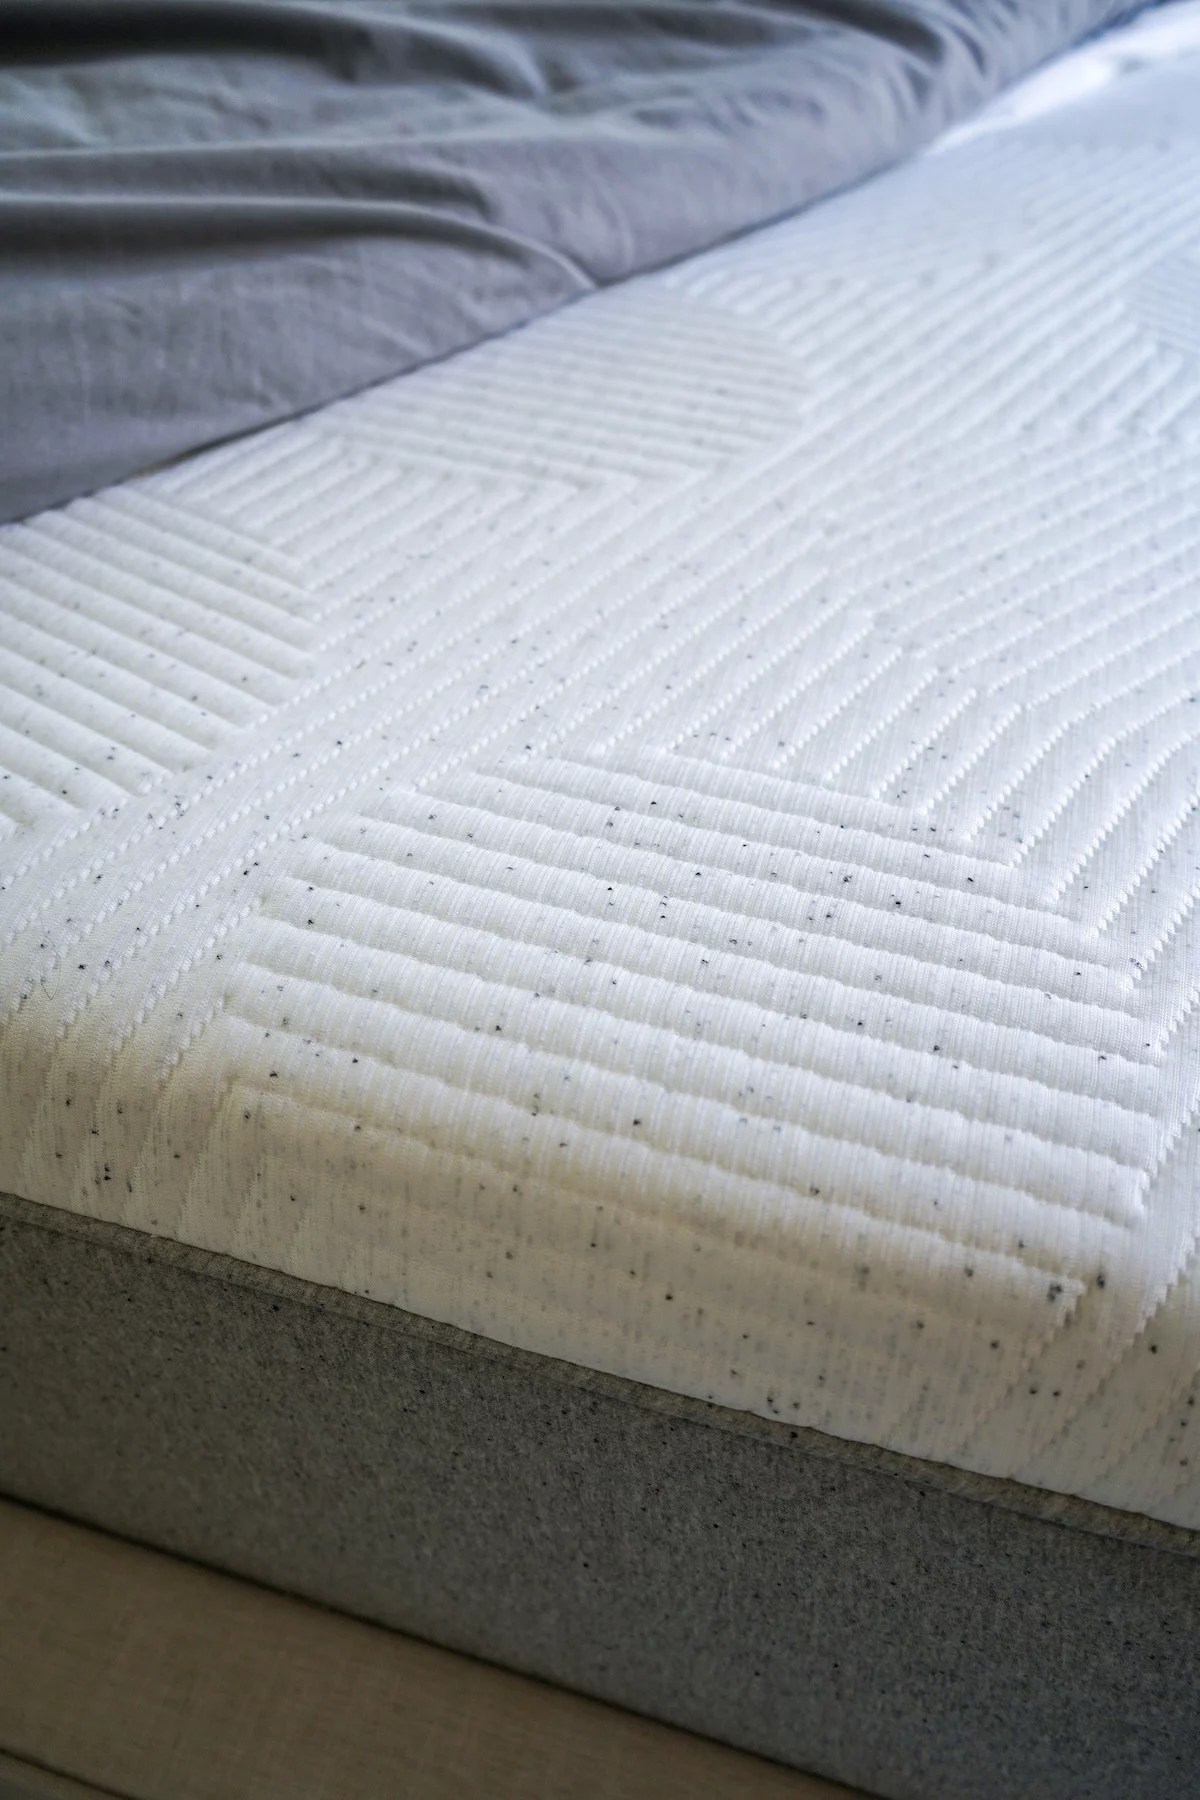 The Casper - Affordable Mattress for Every Budget